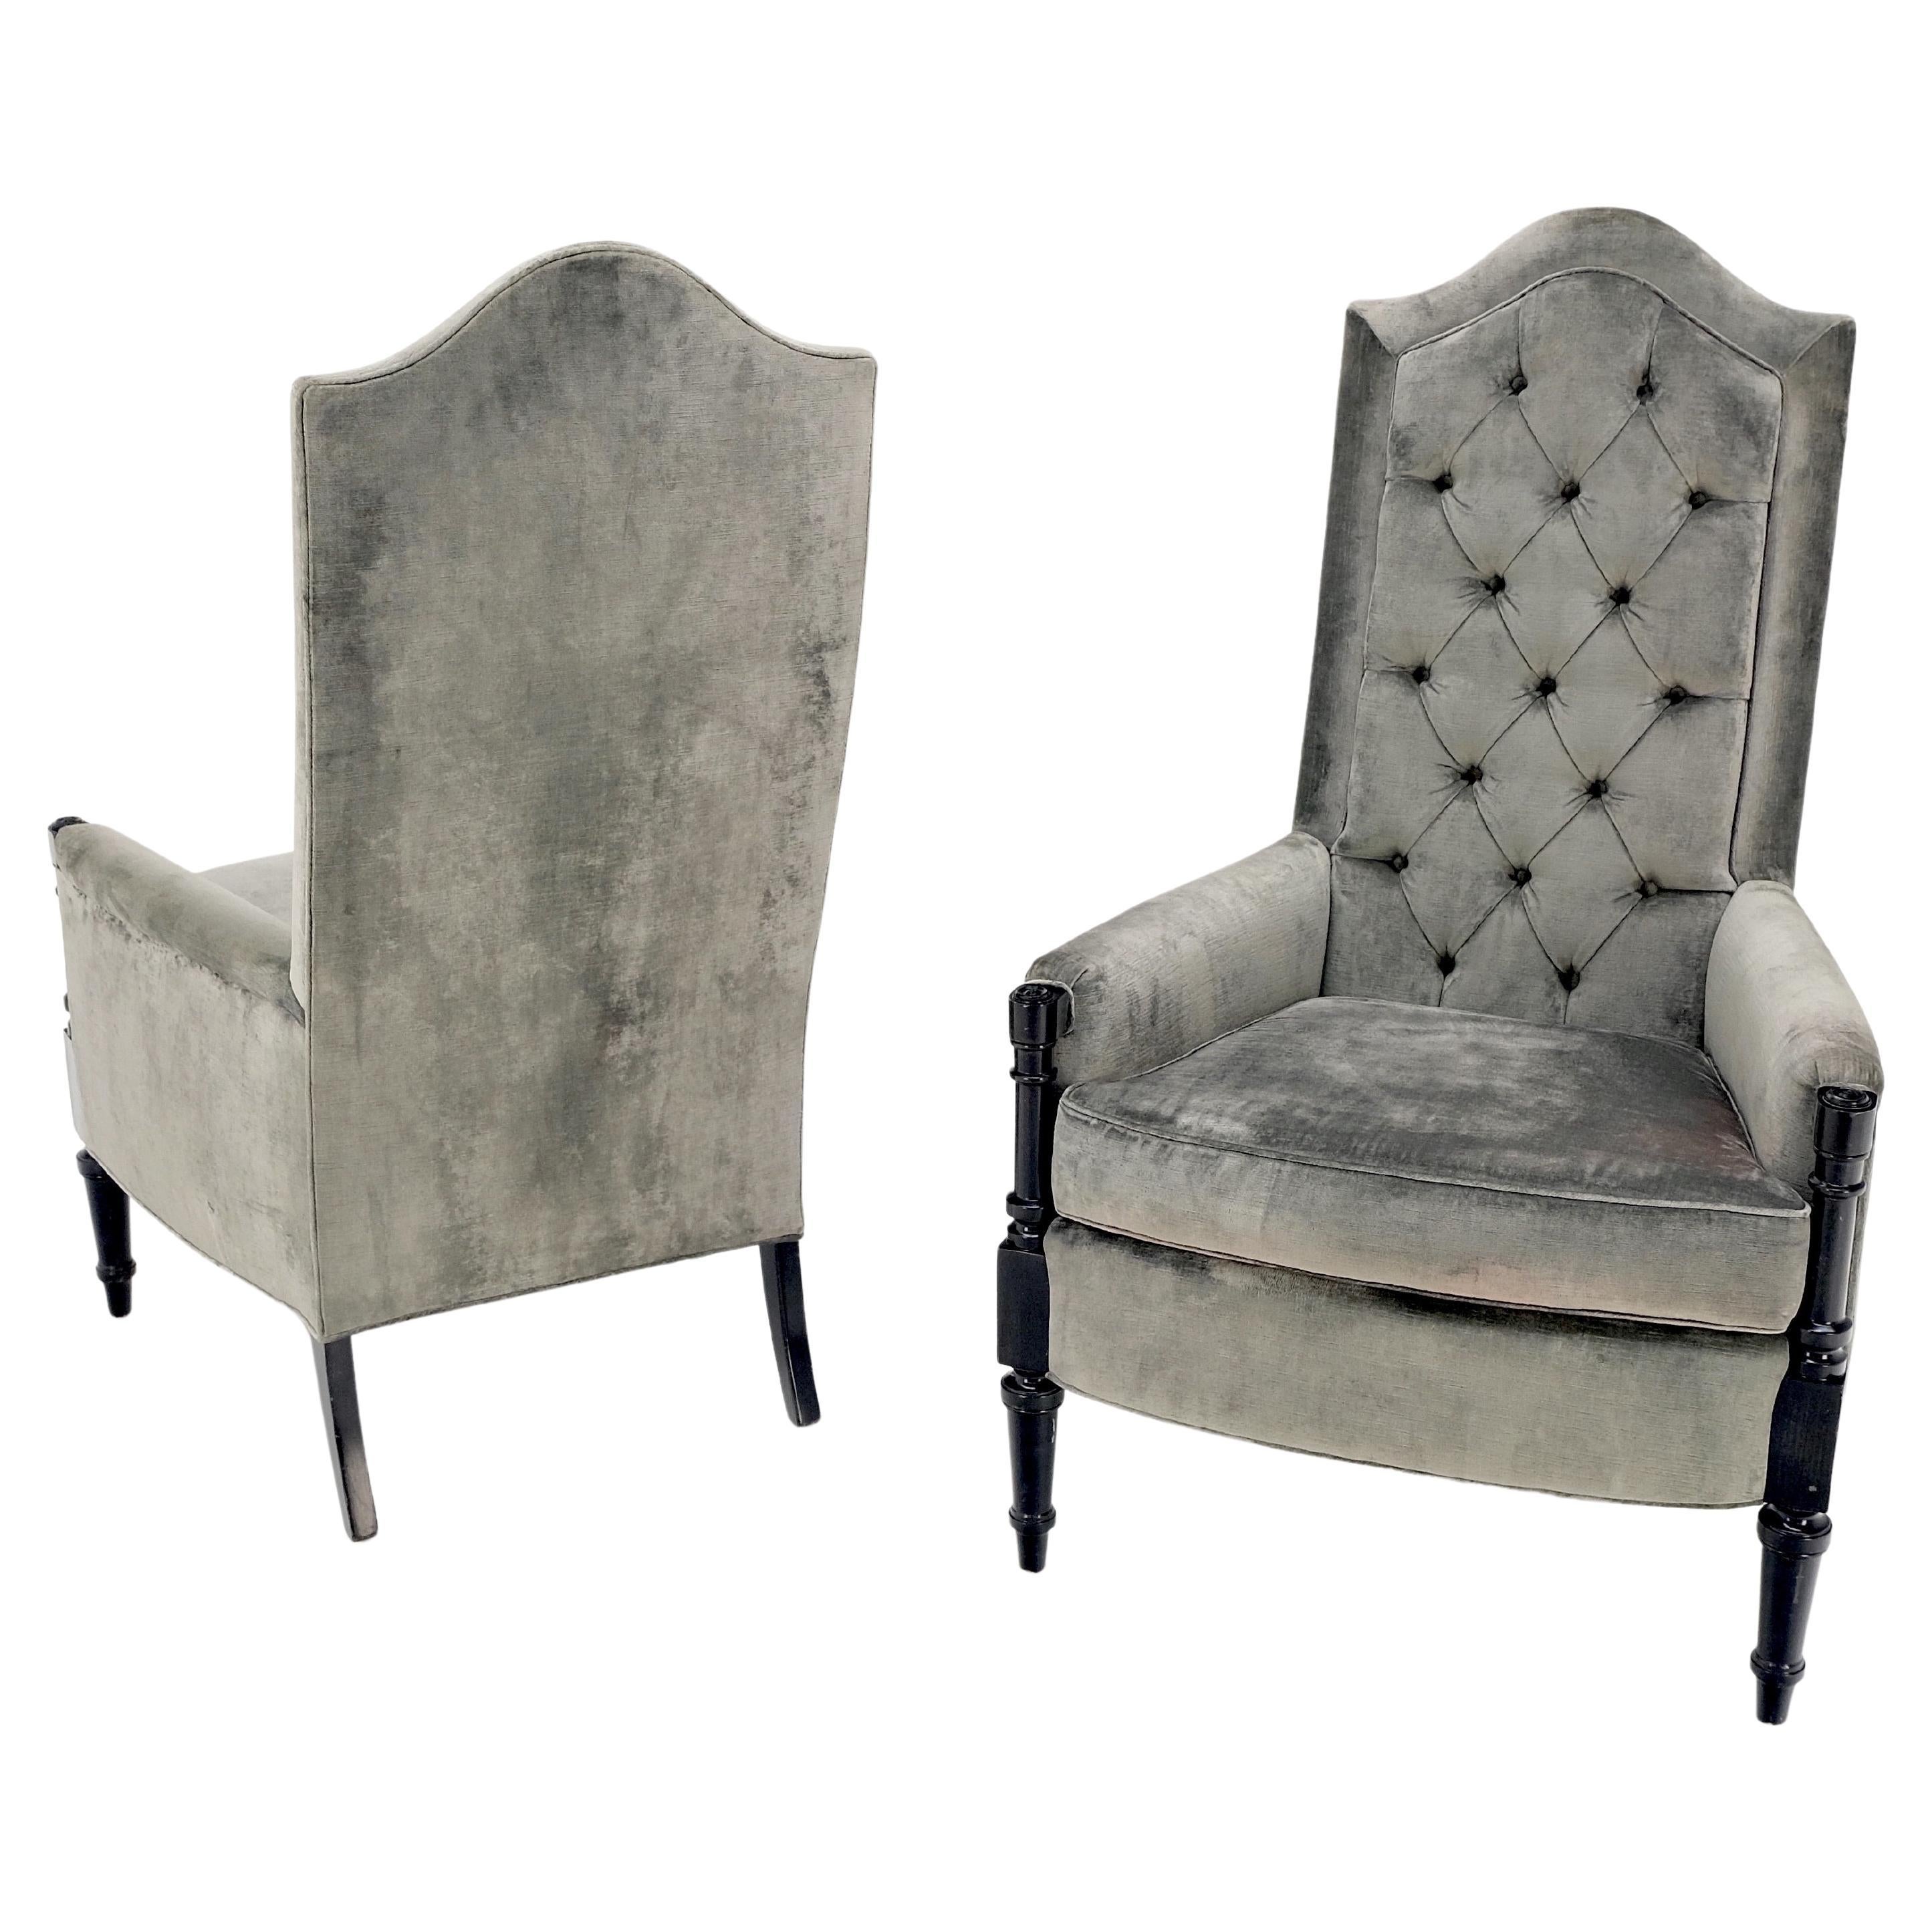 Pair of Tall Tufted Backs Black Lacquer Frames Decorative Arm Chairs Thrones